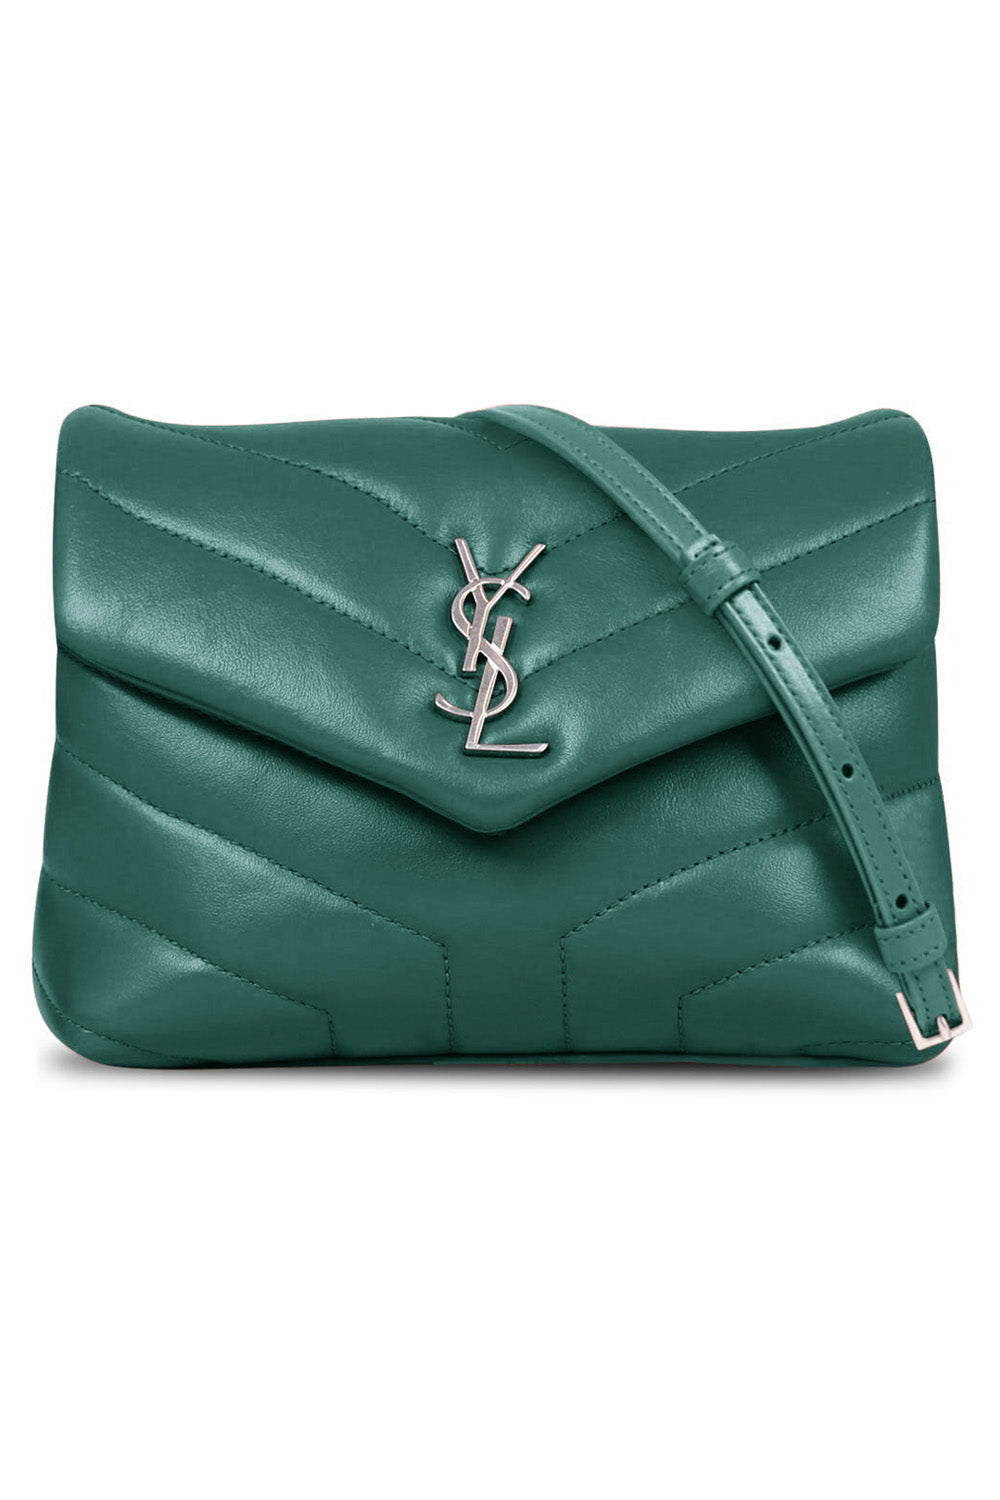 Saint Laurent Toy Loulou Strap Bag in Green